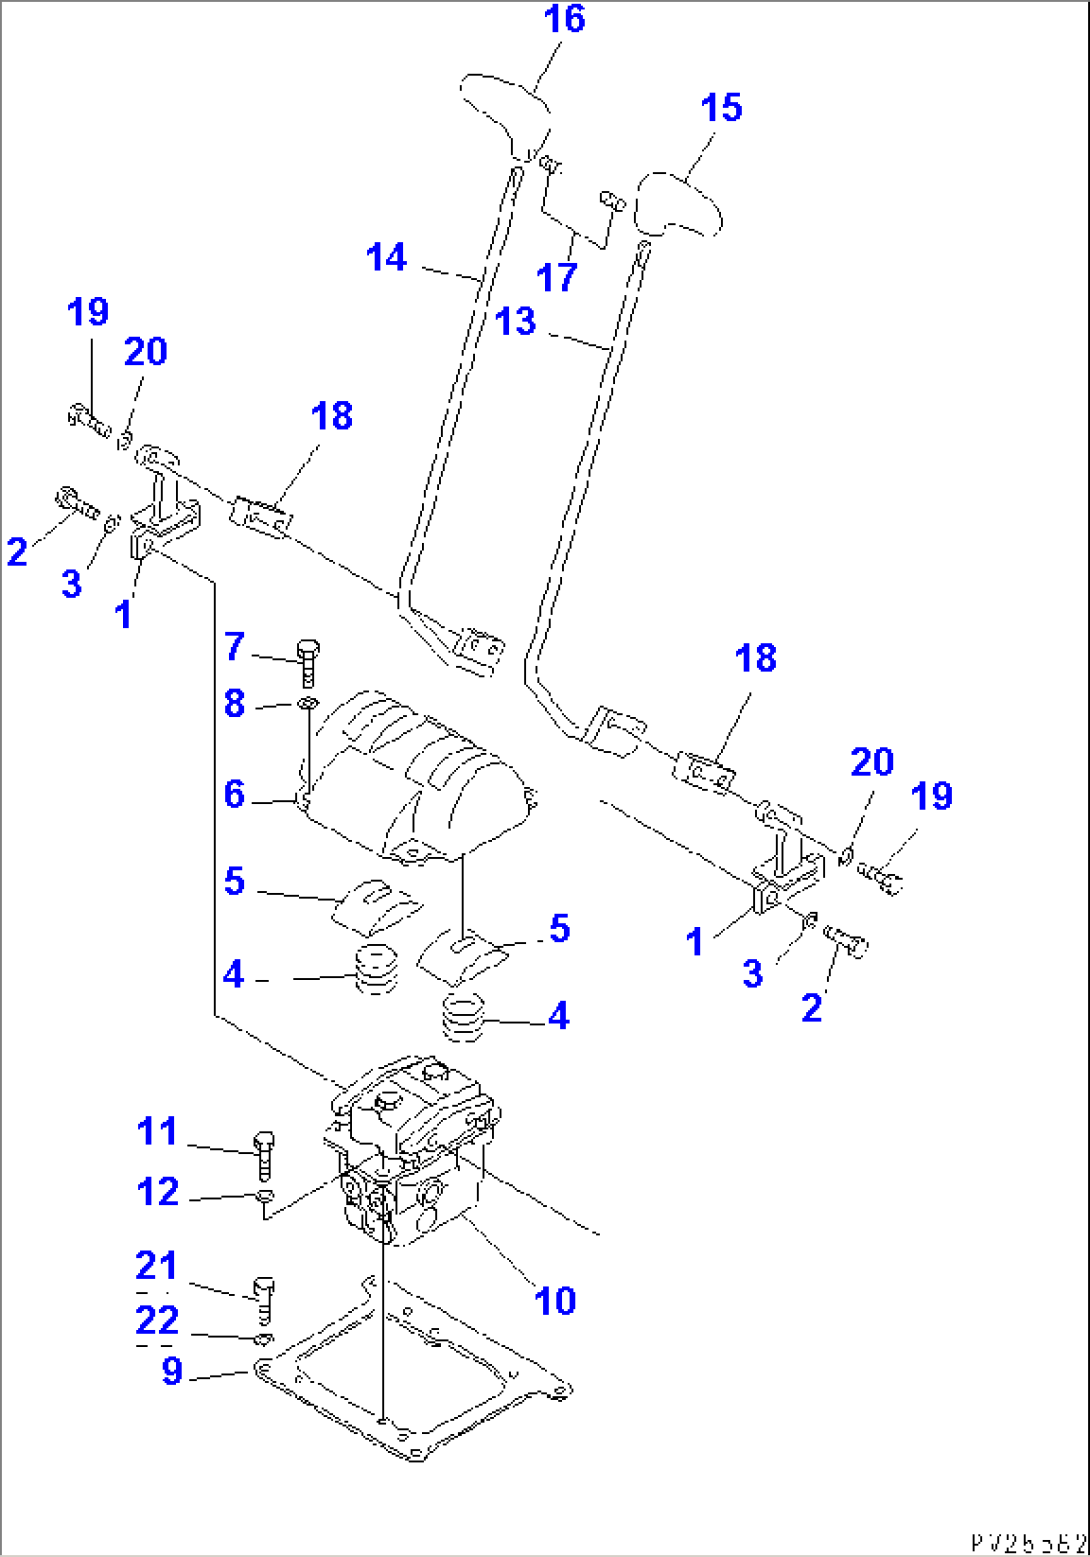 TRAVEL CONTROL LEVER AND LINKAGE(#1101-)